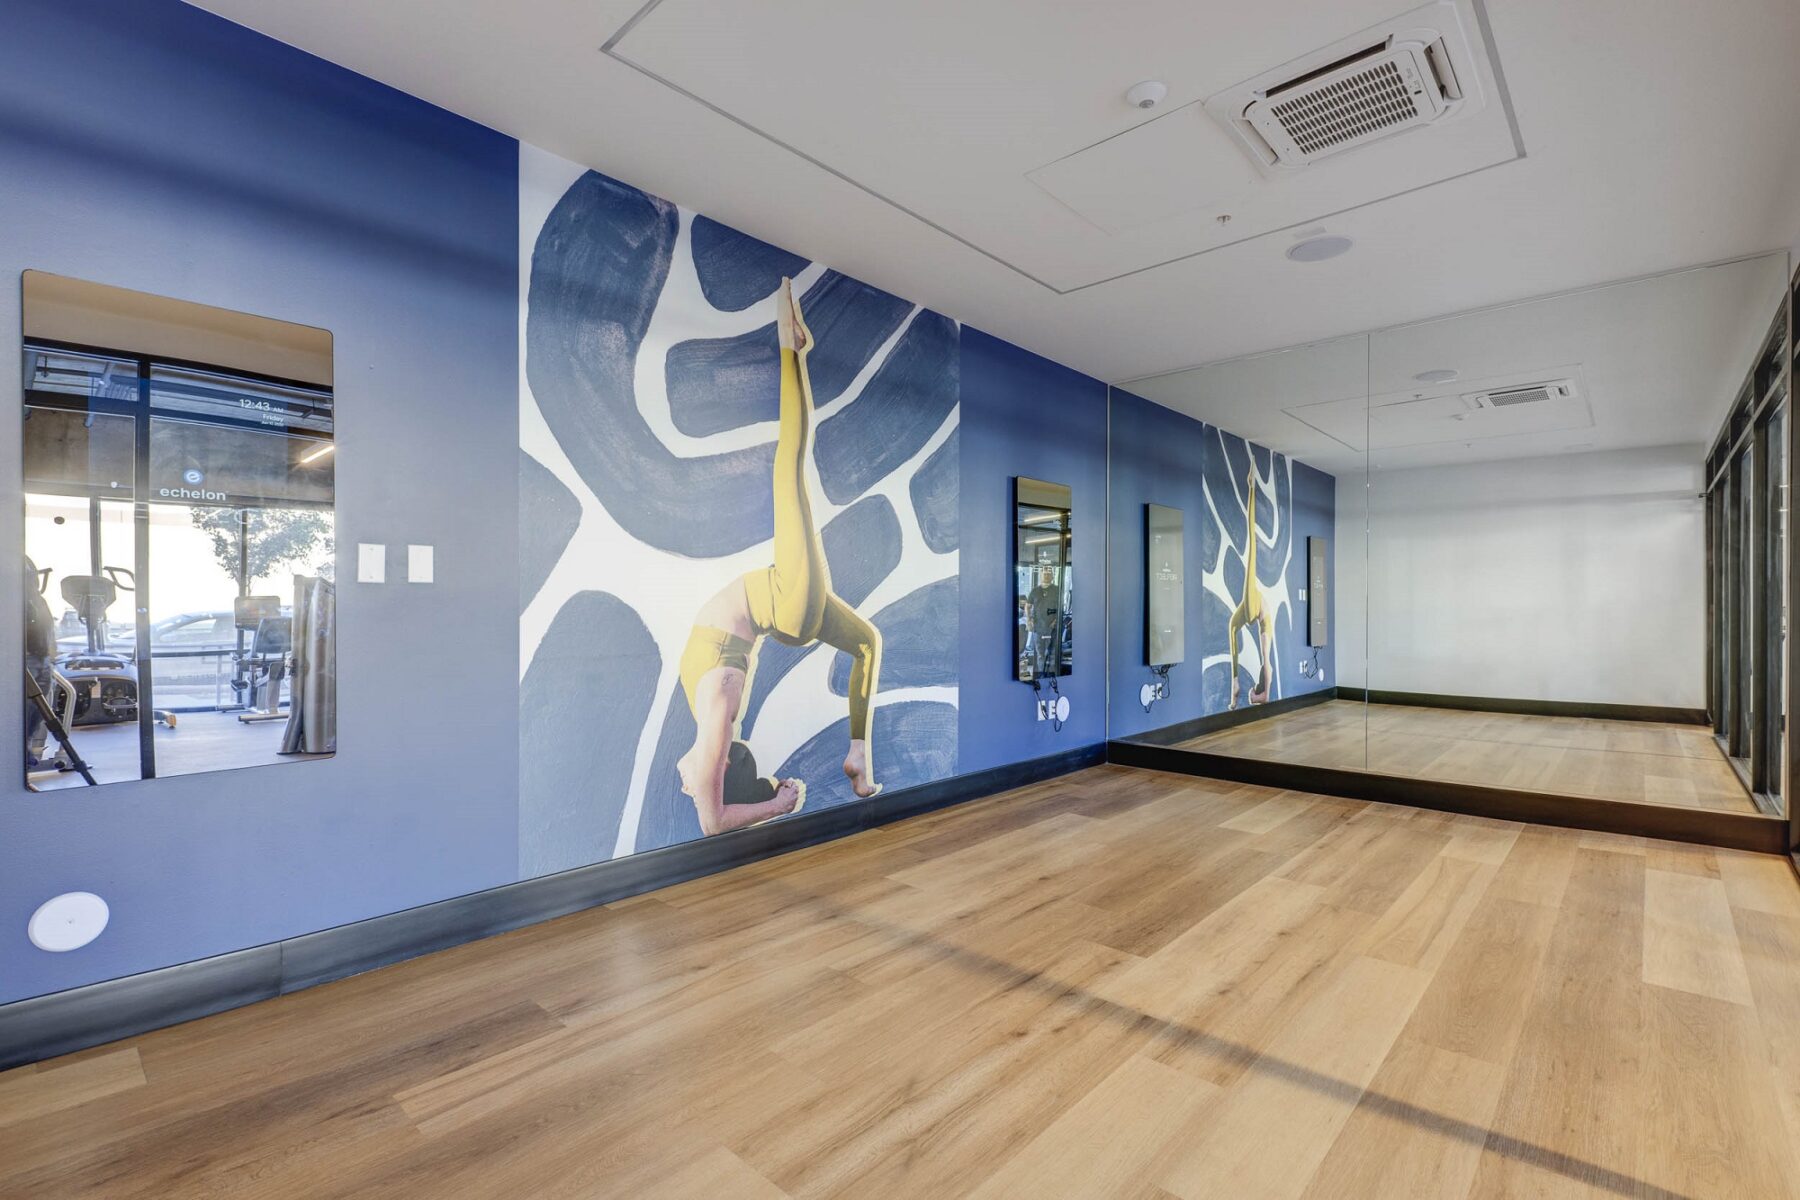 Workout space for fitness classes, yoga and other wellness activities